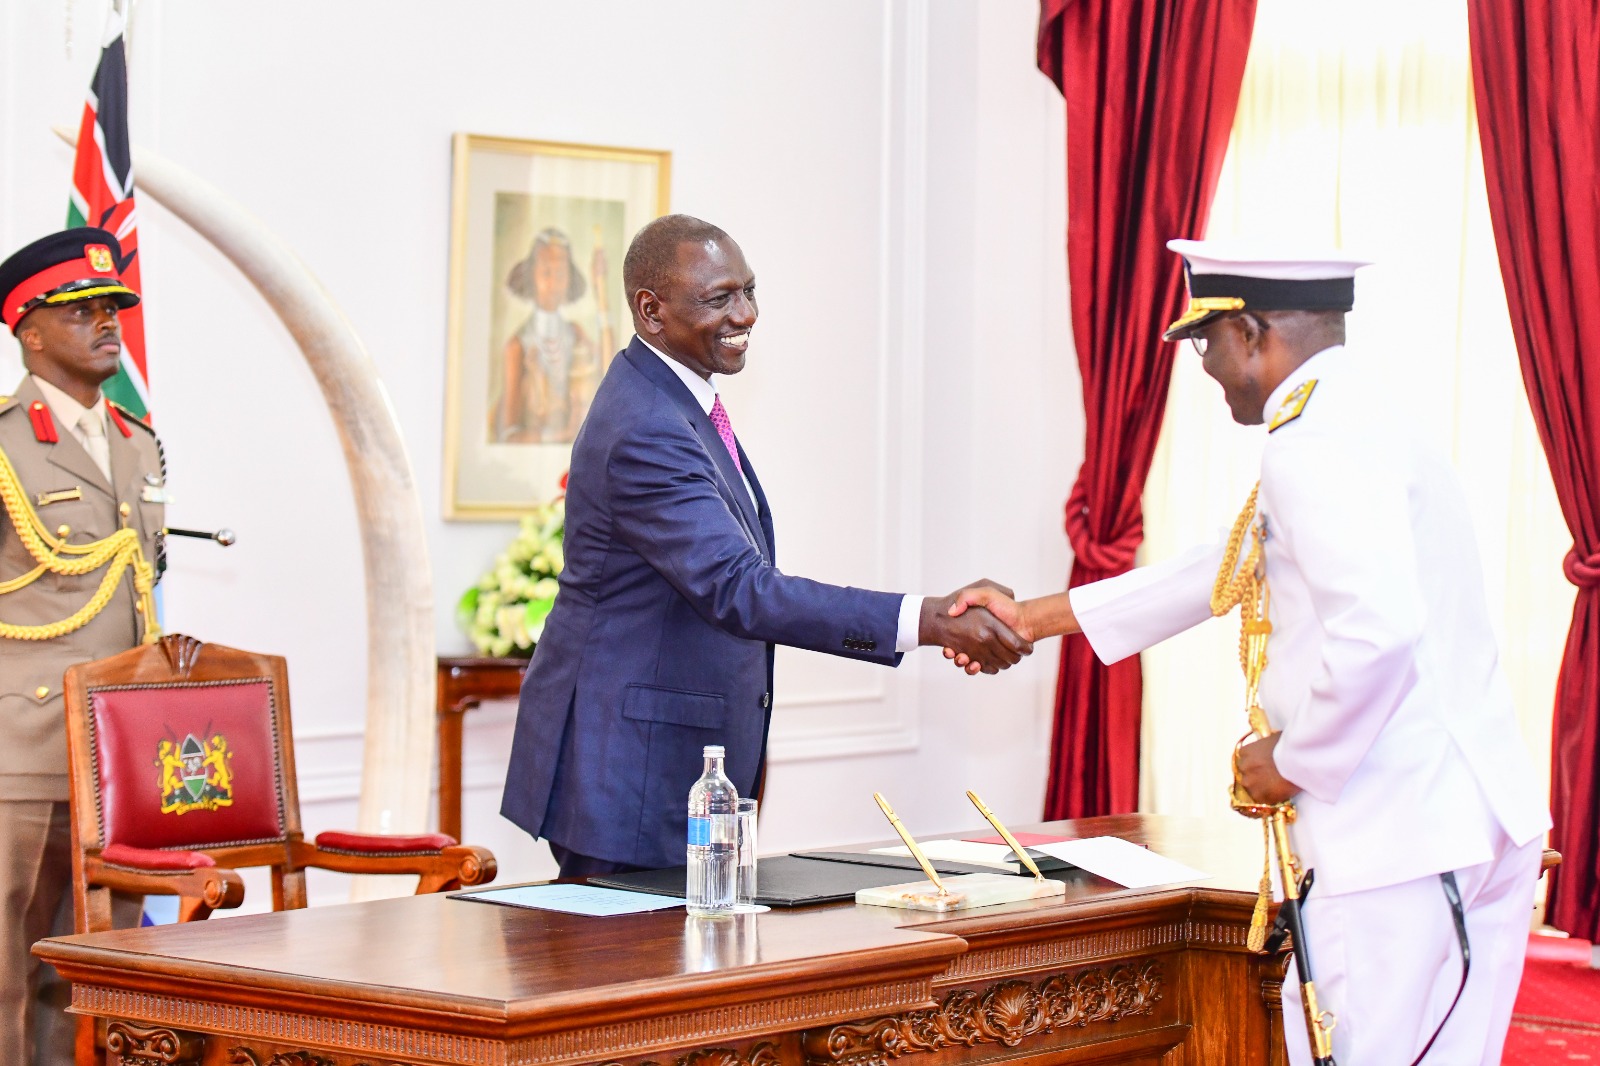 PRESIDENT RUTO TO COAST GUARD BOSS: SERVE WITH DILIGENCE AND UPHOLD THE LAW